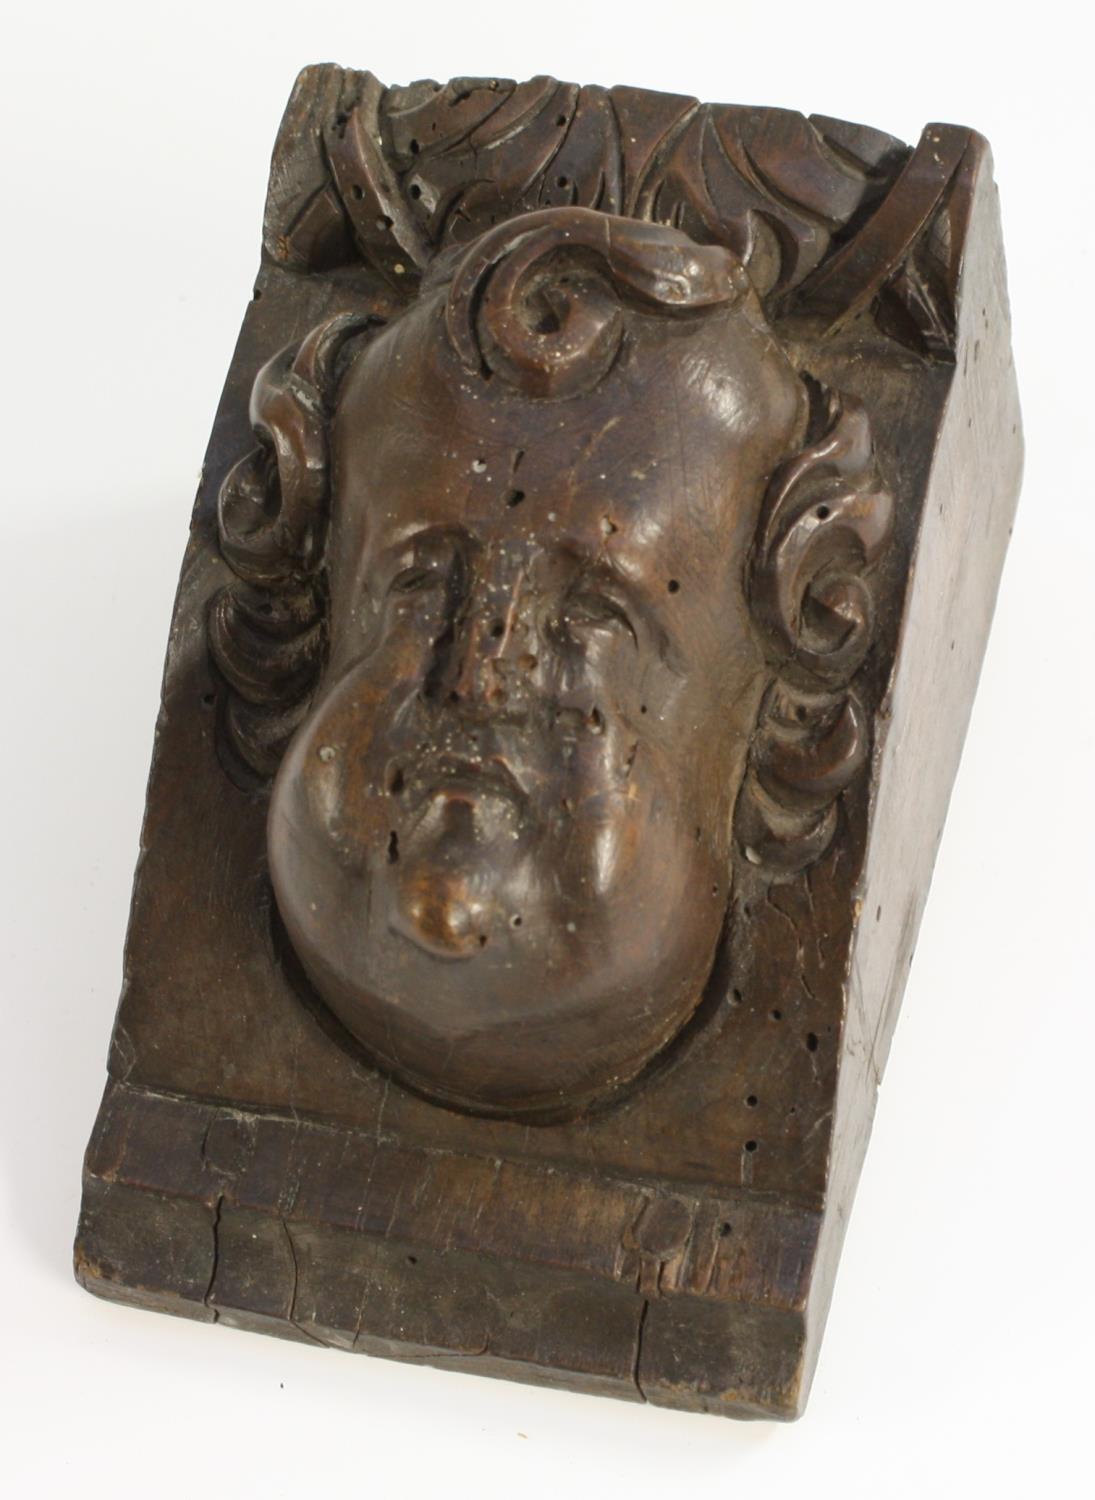 A 17th century walnut sculptural architectural fragment, carved with a putto mask, 12cm x 7.5cm, c.